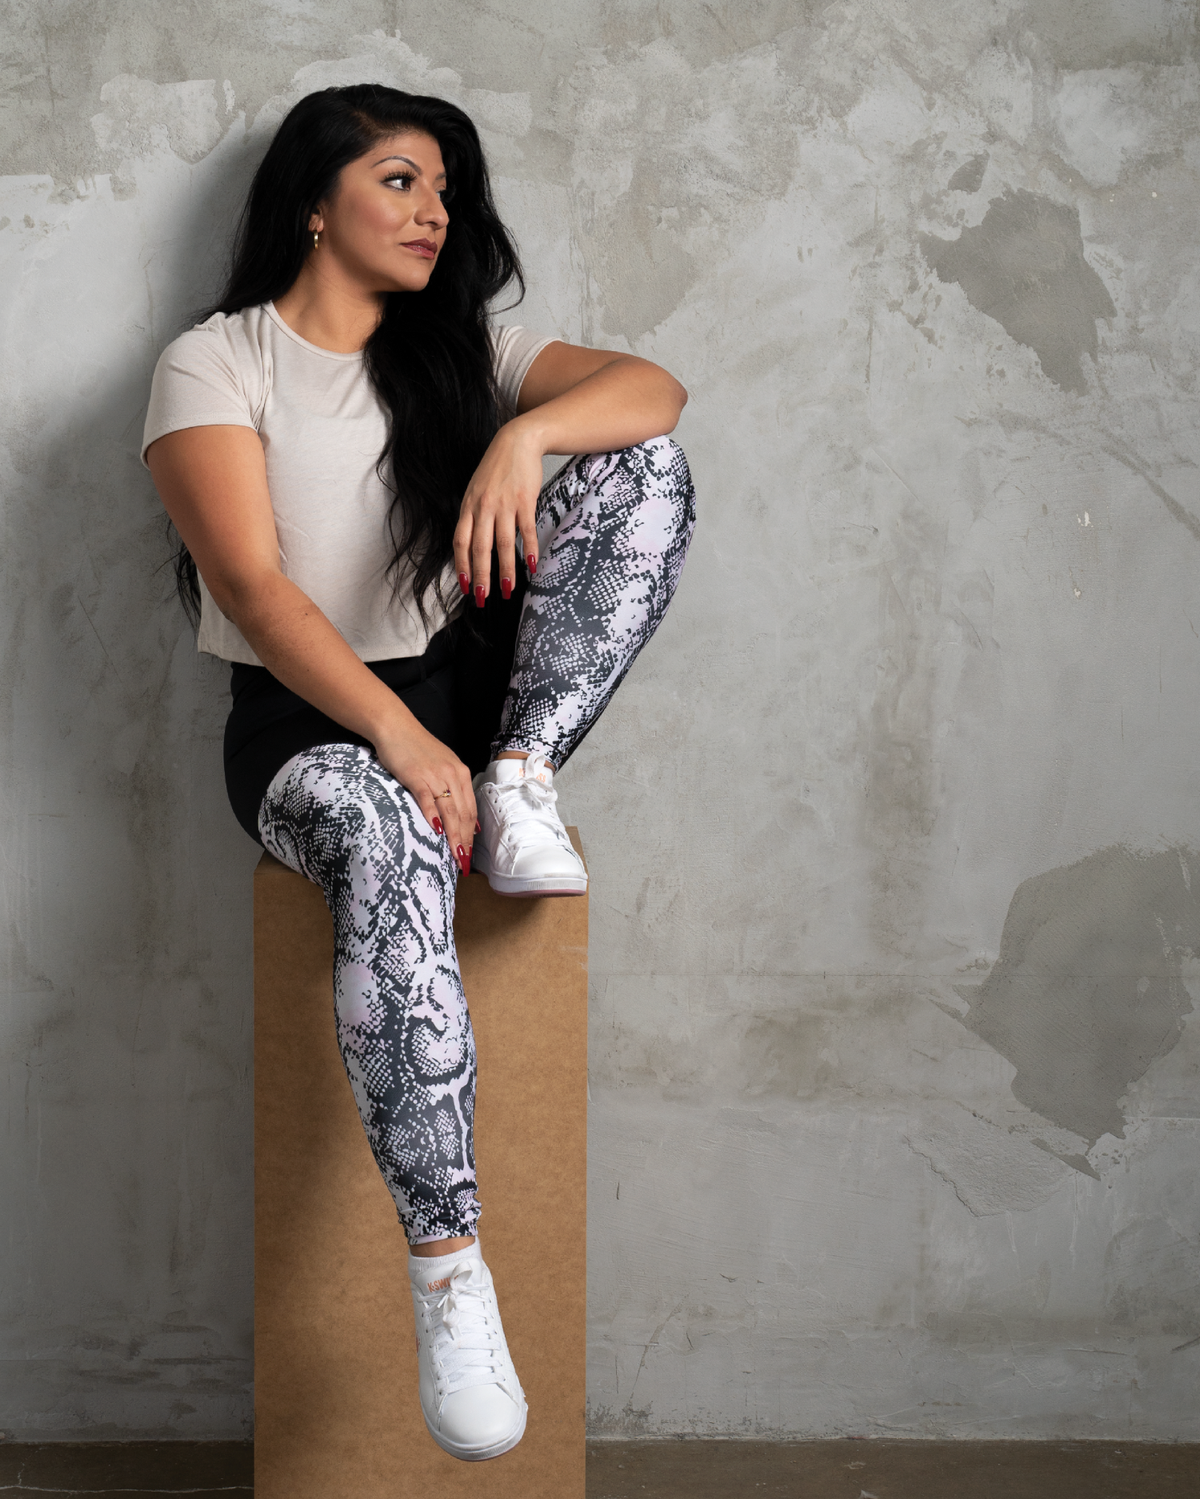 black high waisted leggings in animal pattern and cream crop tee model sitting on a cube in from of concrete wall